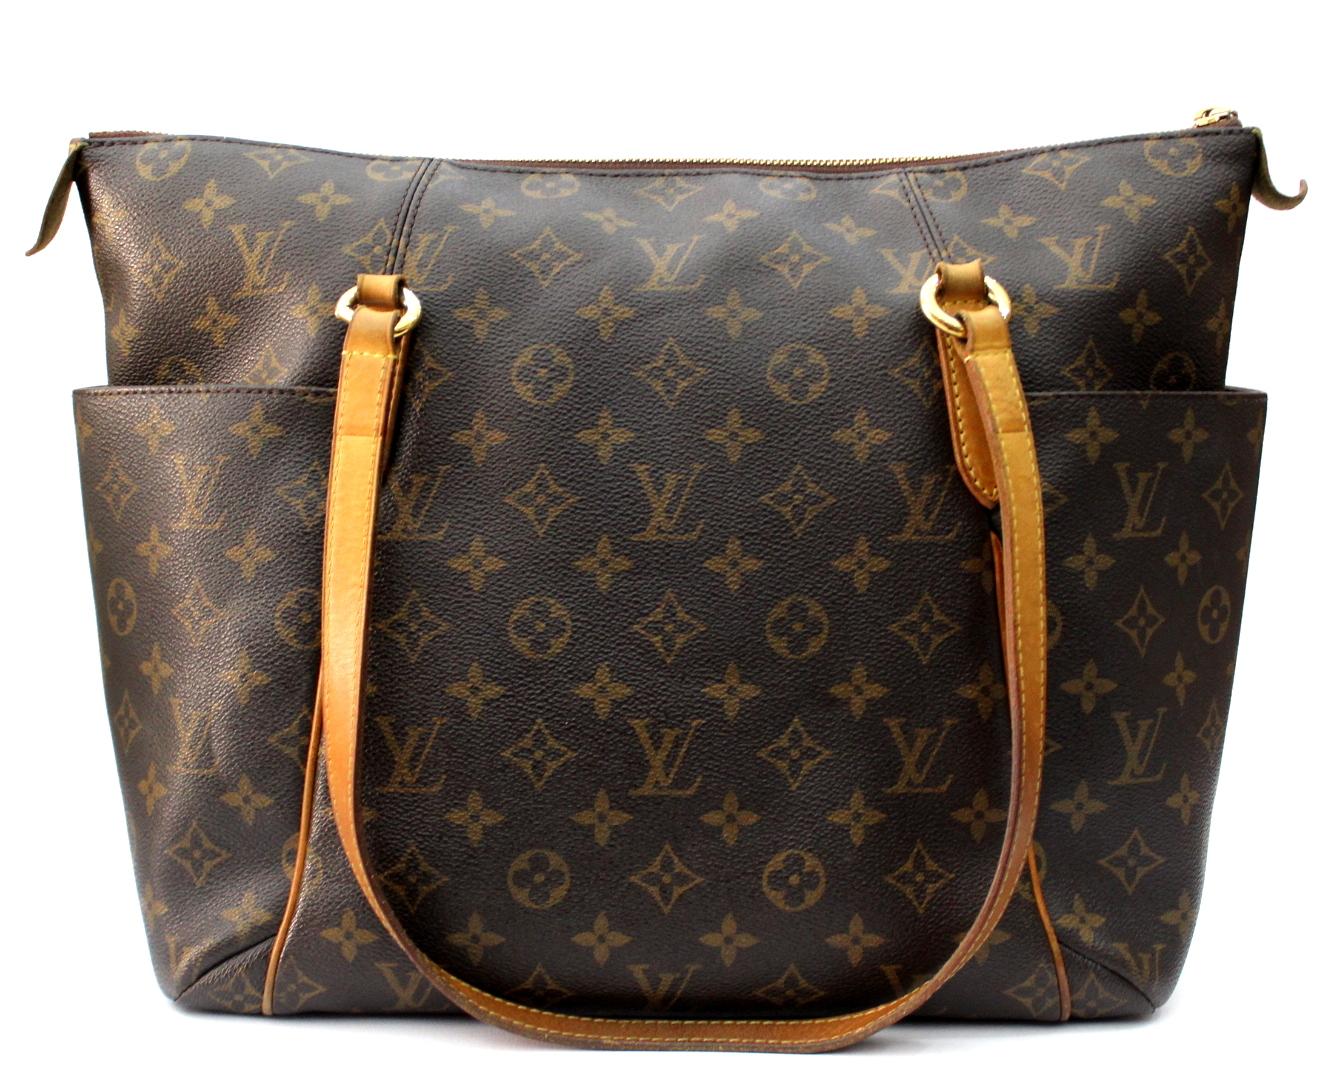 
The Louis Vuitton Monogram Canvas Totally MM bag is among the newest Louis Vuitton handbags and is particularly striking in Monogram Canvas. It features a large but light design with an extra spacious interior and two large side pockets. This is a